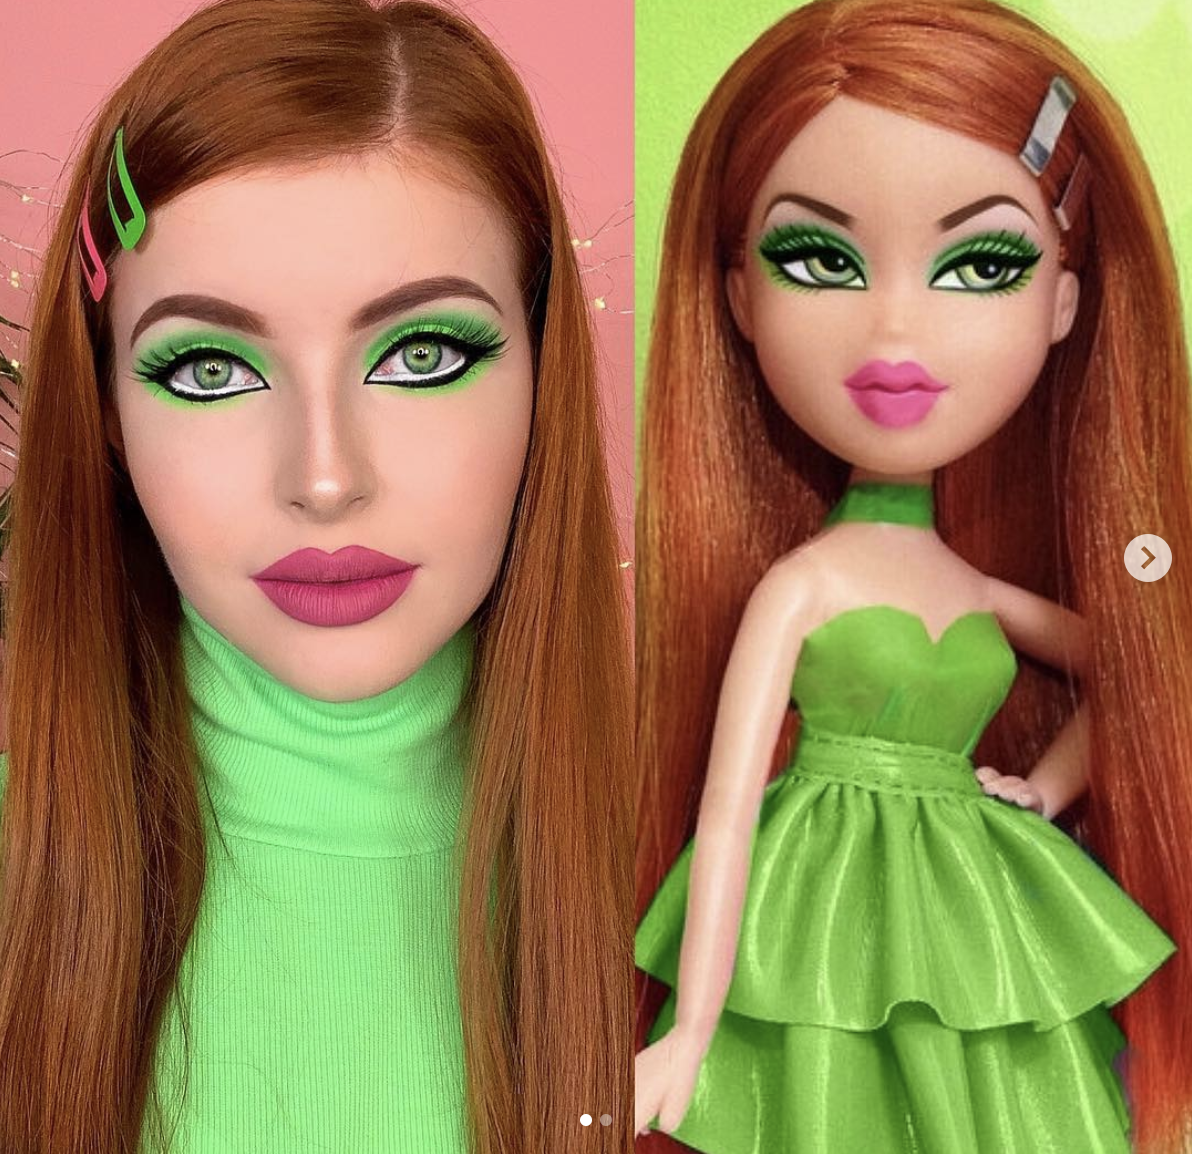 Beauty Influencers Are Doing Their Like Dolls For